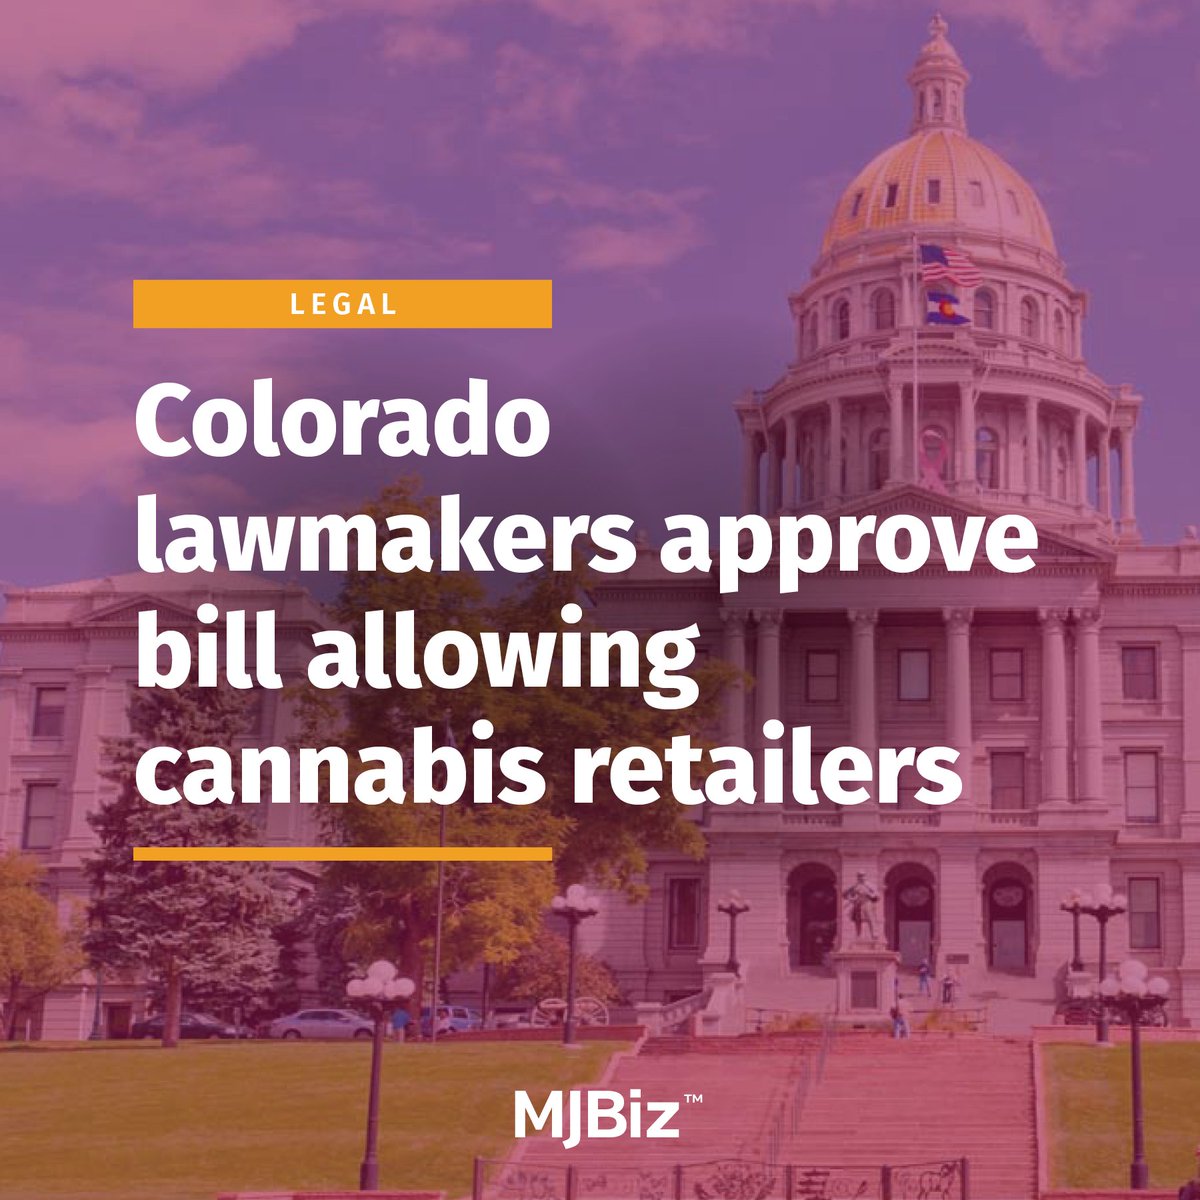 #Colorado #cannabis stores will be allowed to sell food and beverages under a bill approved by state lawmakers. Get the details: bit.ly/3yl2qmA (Photo by volgariver/stock.adobe.com)